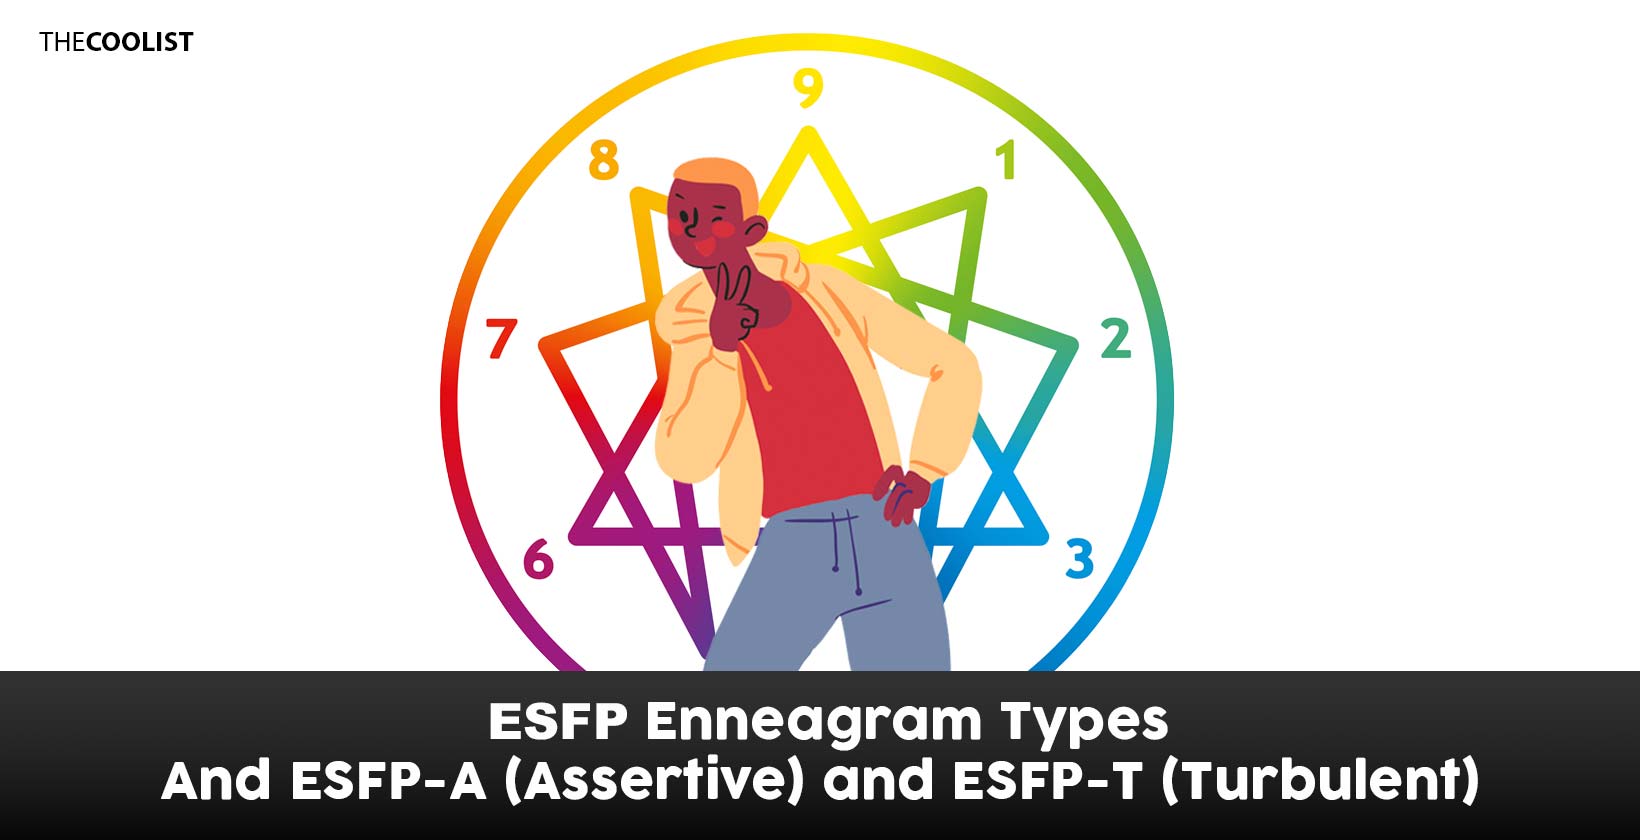 ESFP Enneagram Subtypes and ESFP-A (Assertive) and ESFP-T (Turbulent)